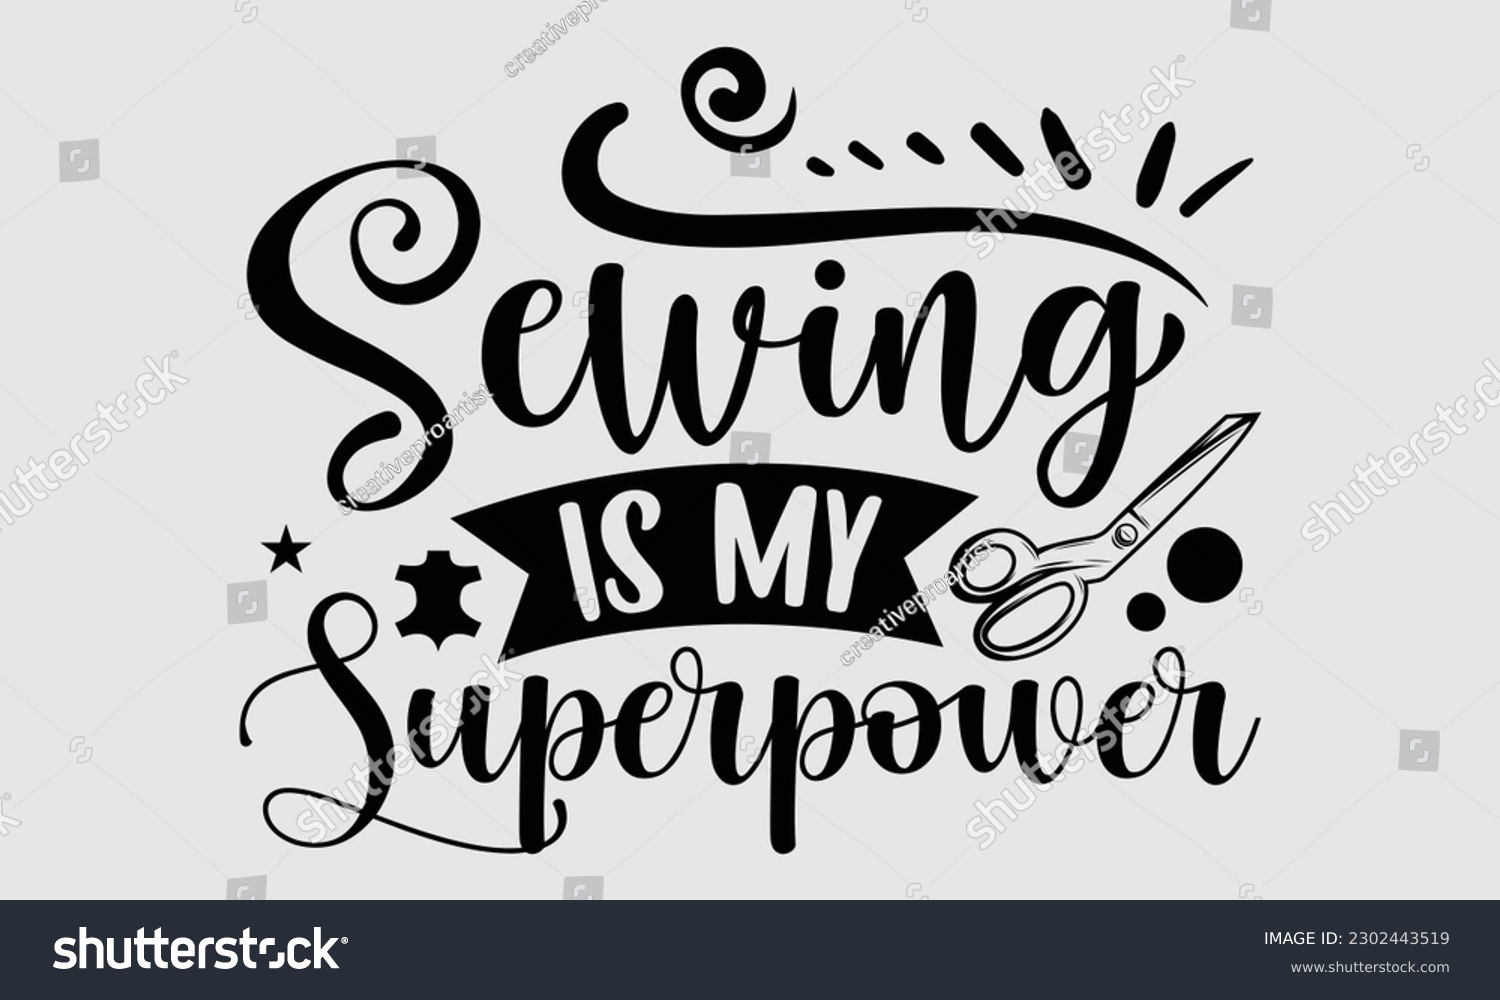 SVG of Sewing is my superpower- Sewing t- shirt design, Hand drawn vintage illustration for prints on eps, svg Files for Cutting, greeting card template with typography text svg